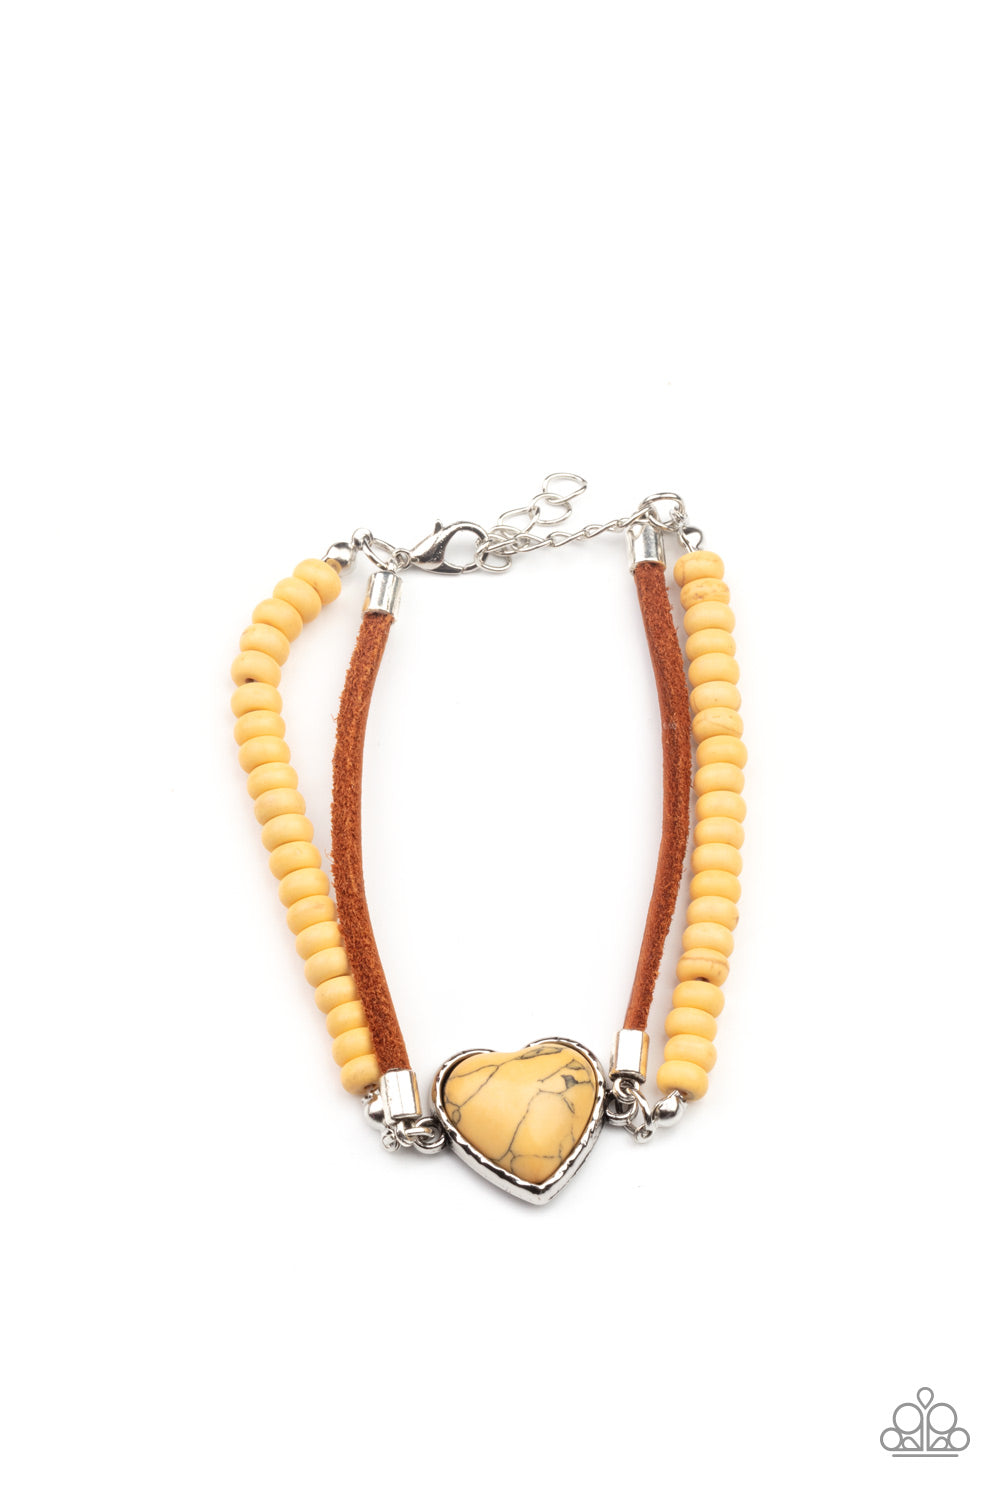 Charmingly Country - Yellow Bracelet